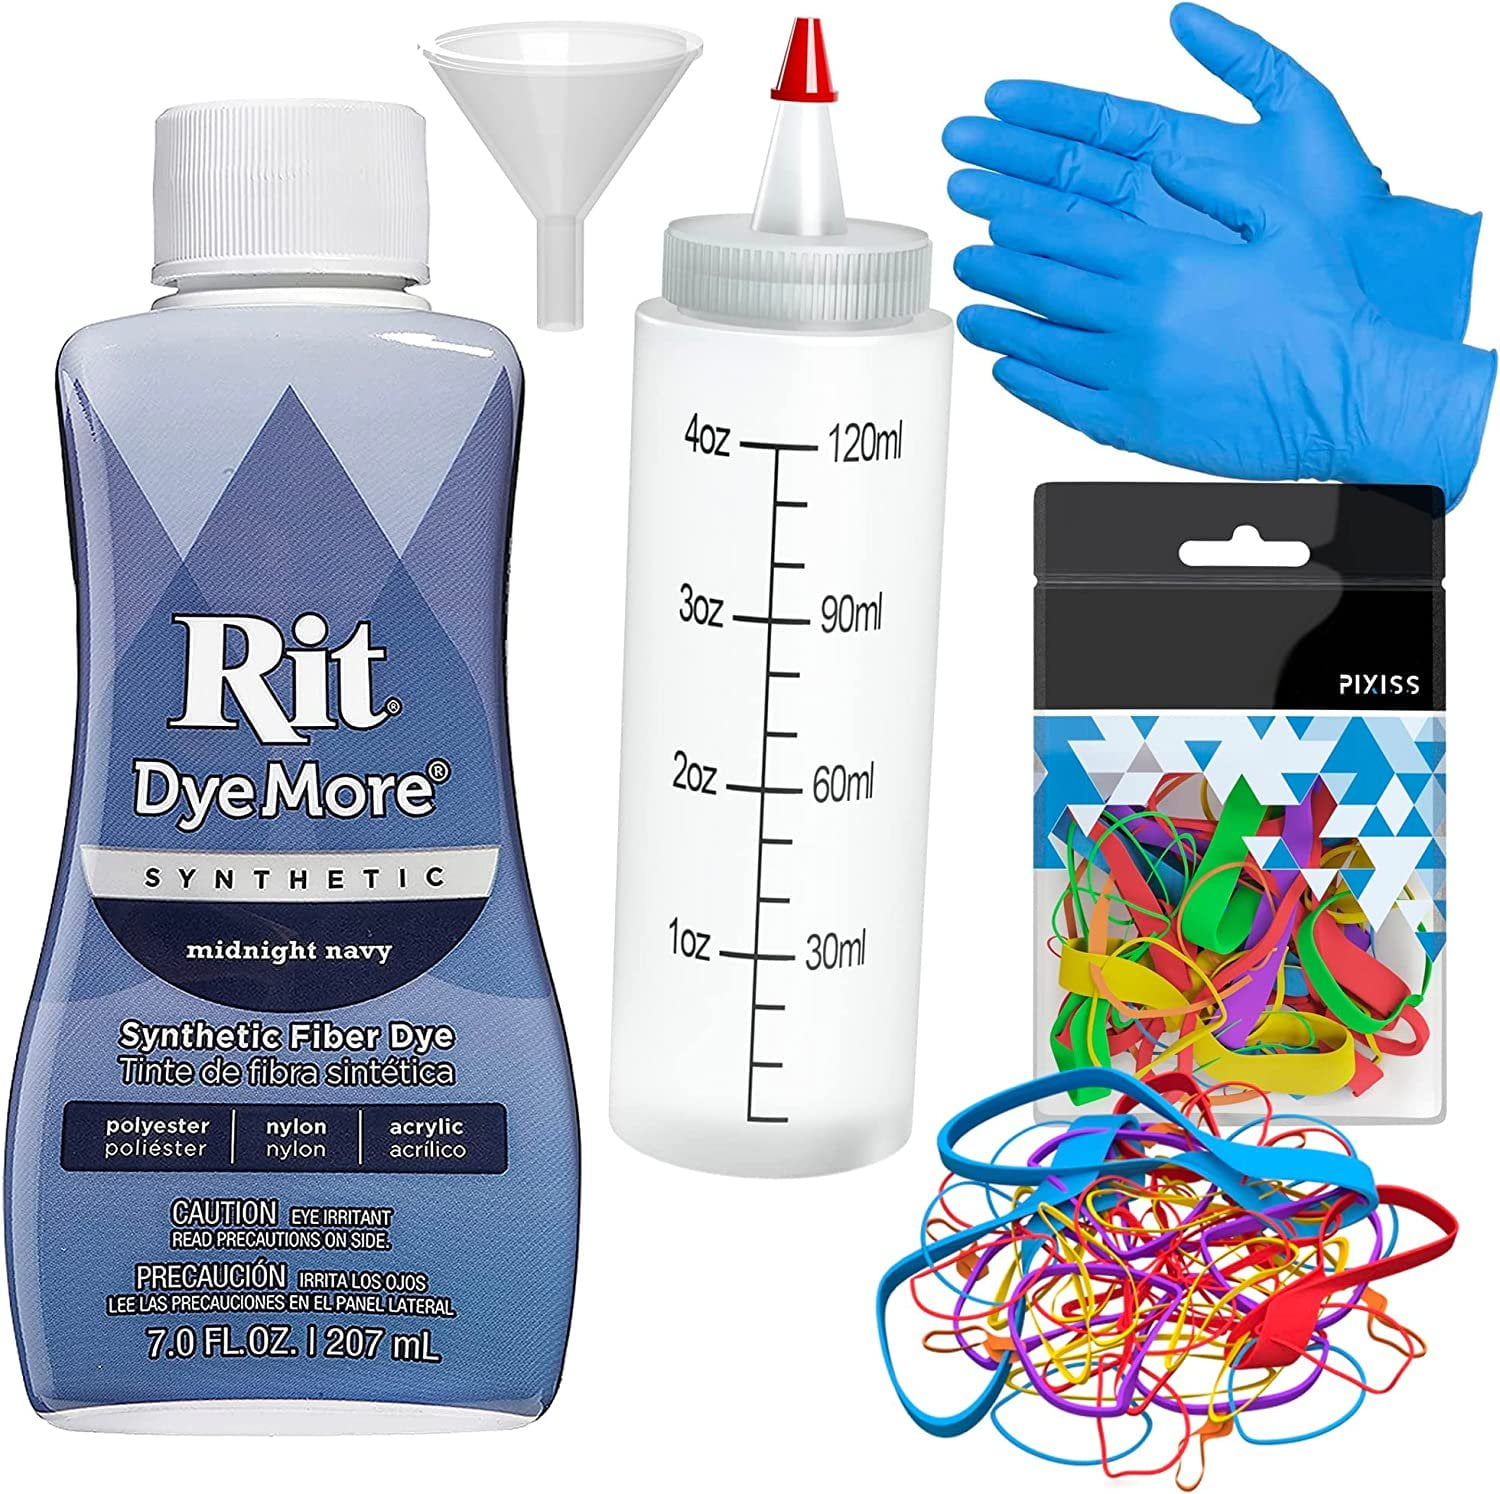 Create Basics Tie Dye Party Tub Kit - Rainbow Tie Dye in 14 Colors, 4  Refills, Gloves, Rubber Bands